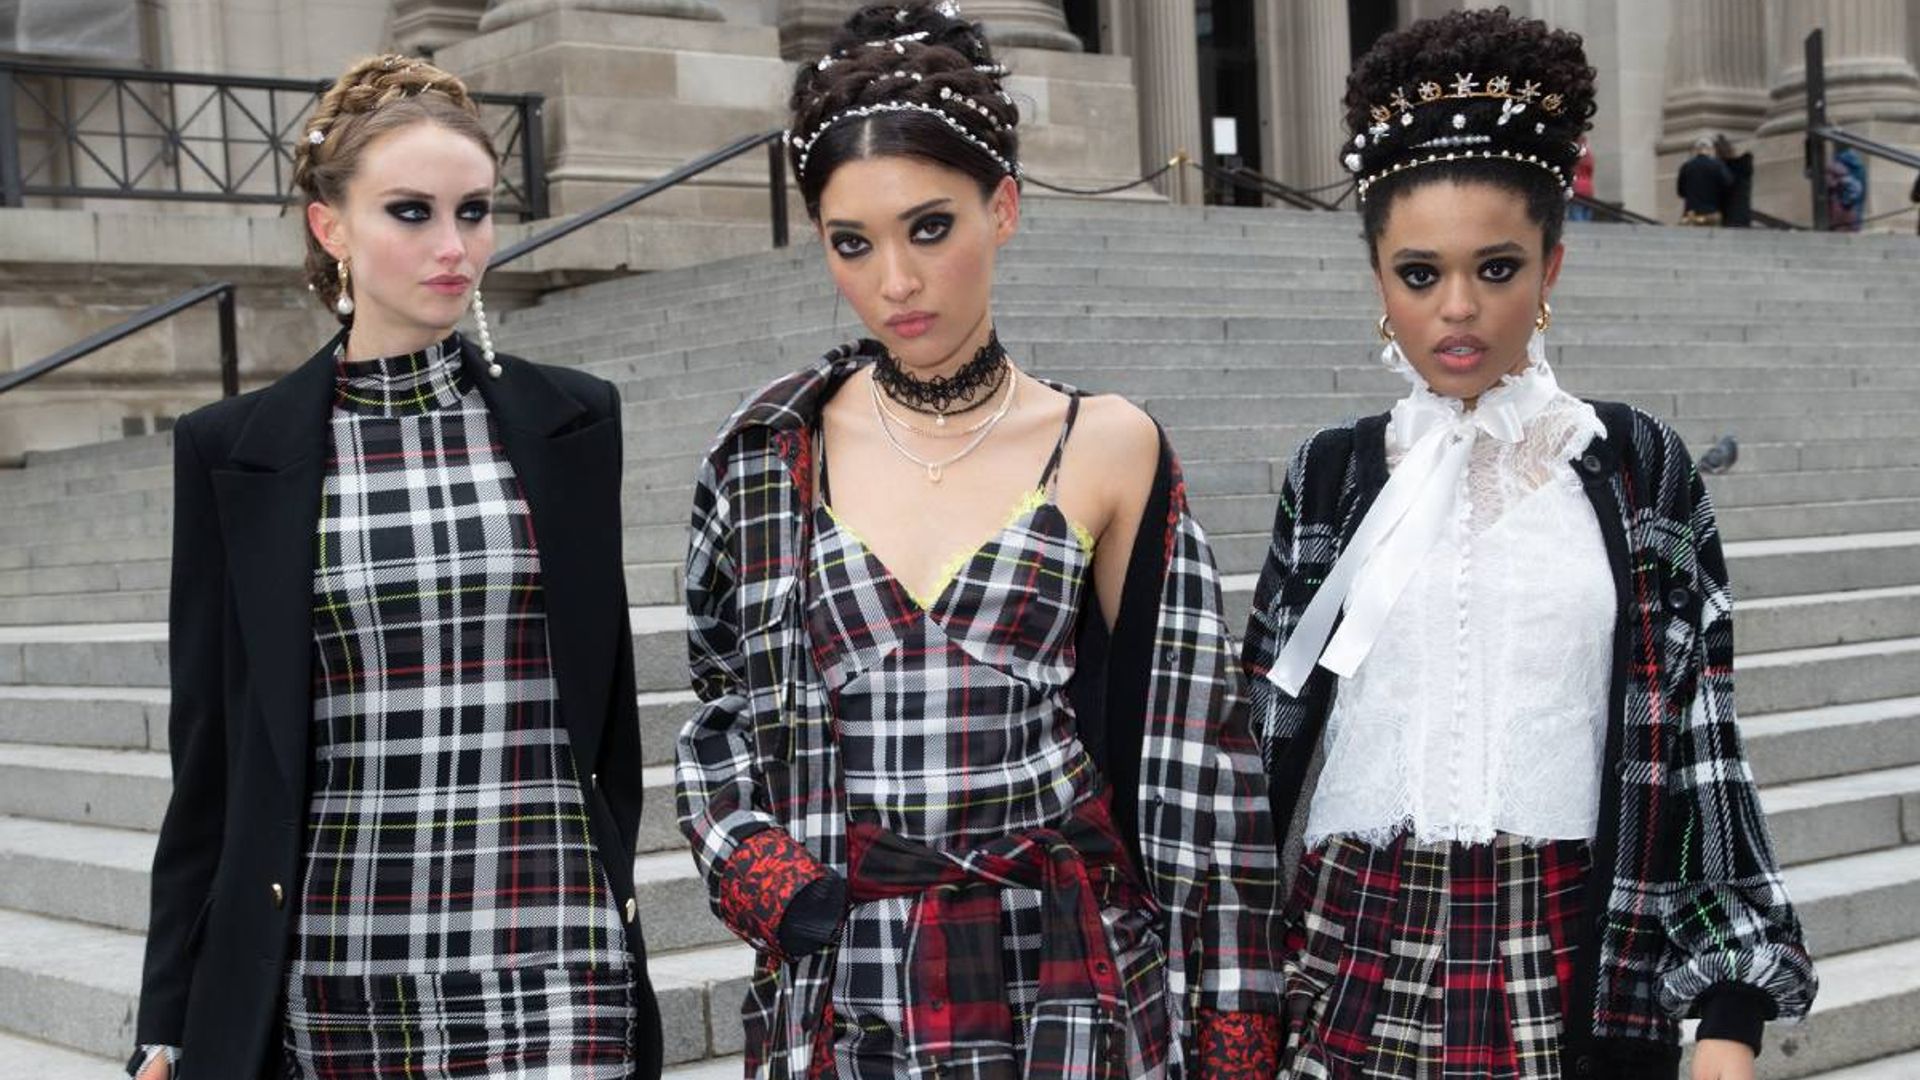 Everyone's talking about Alice + Olivia's Gossip Girl-inspired looks